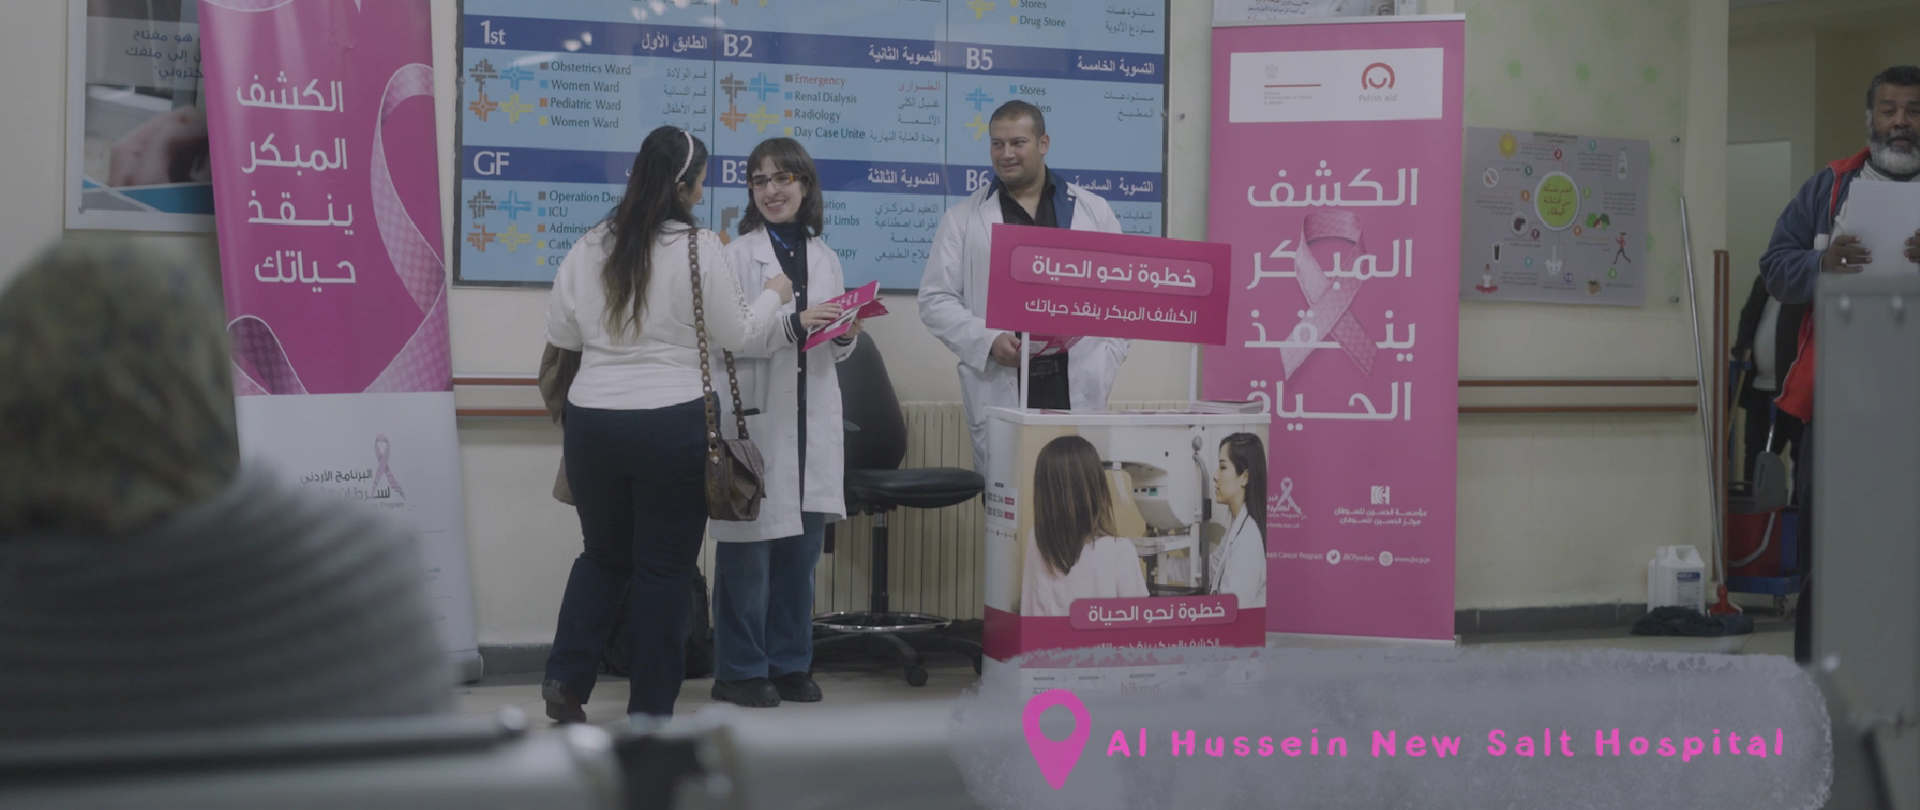 Several individuals gathered around a pink banner in a hospital lobby.